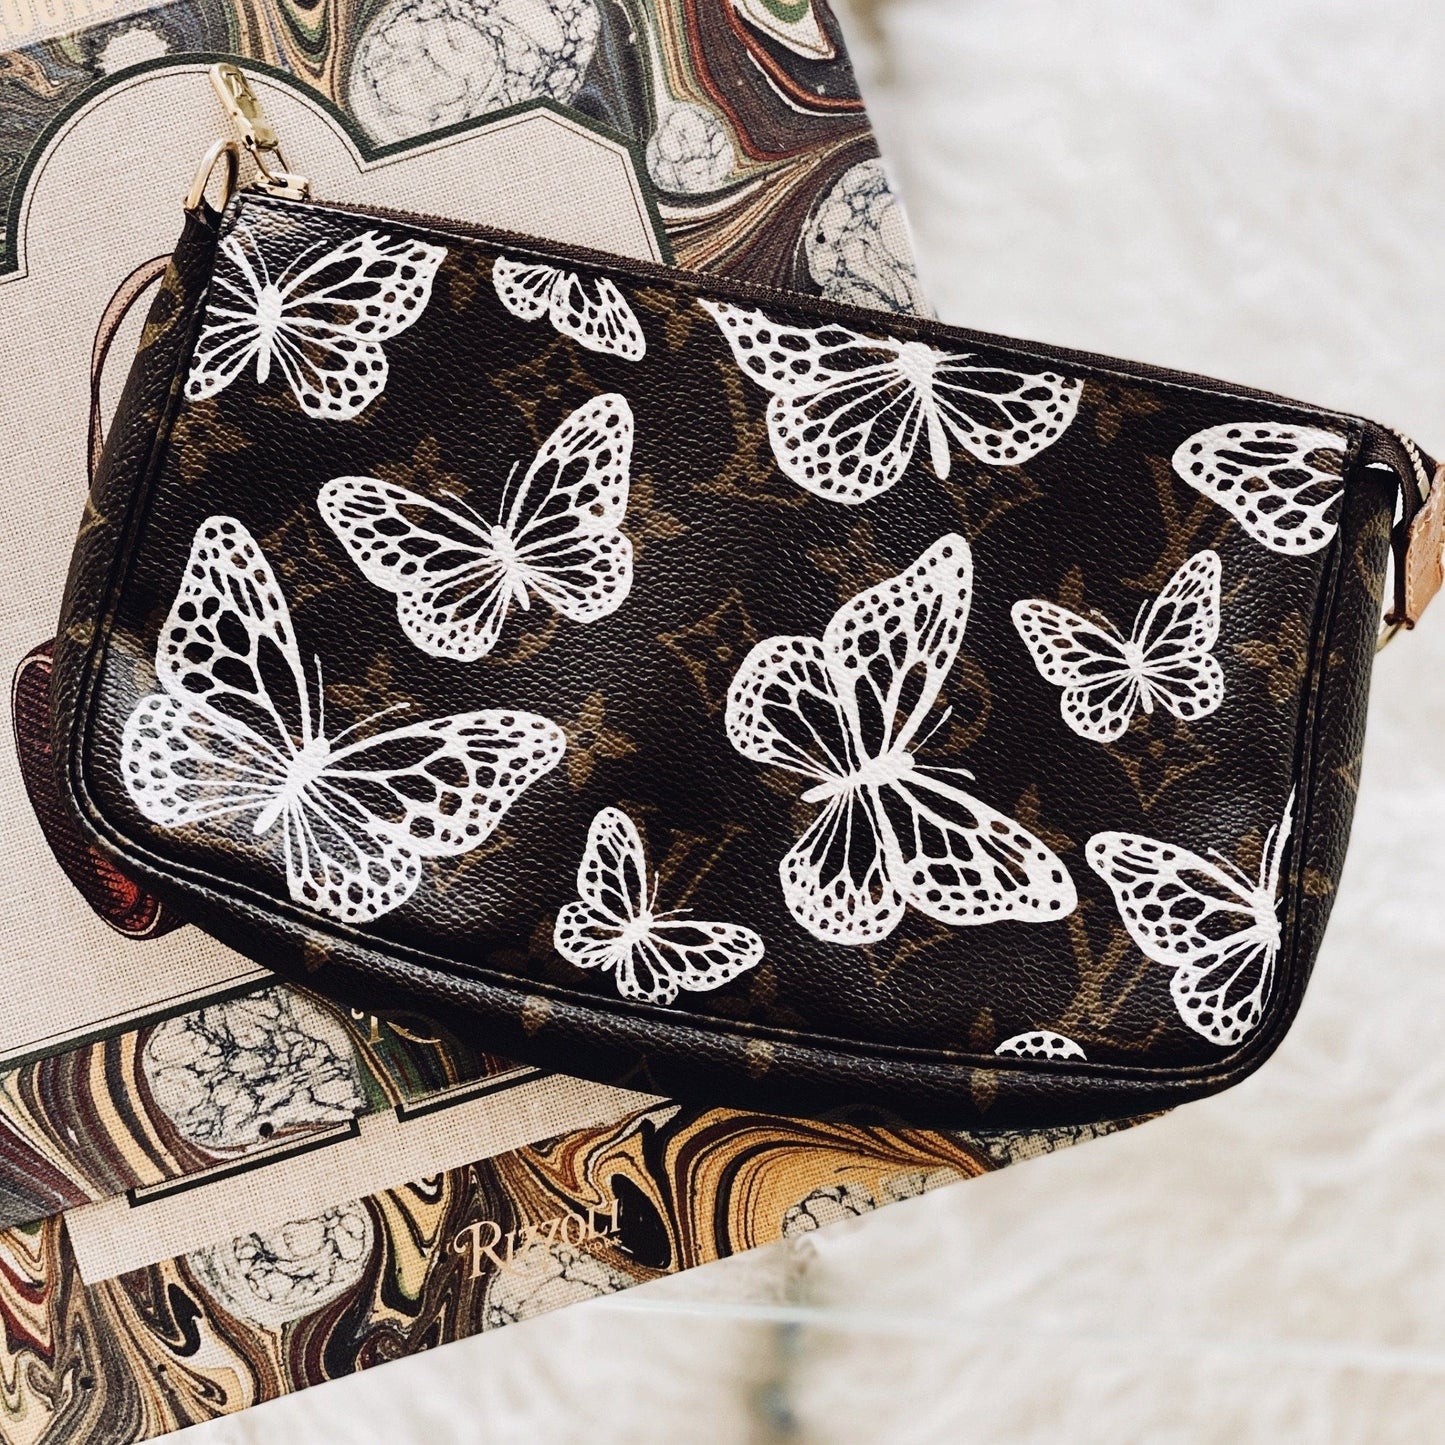 Butterflies in Lace Artwork, Painted on a Louis Vuitton Pouchette  by New Vintage